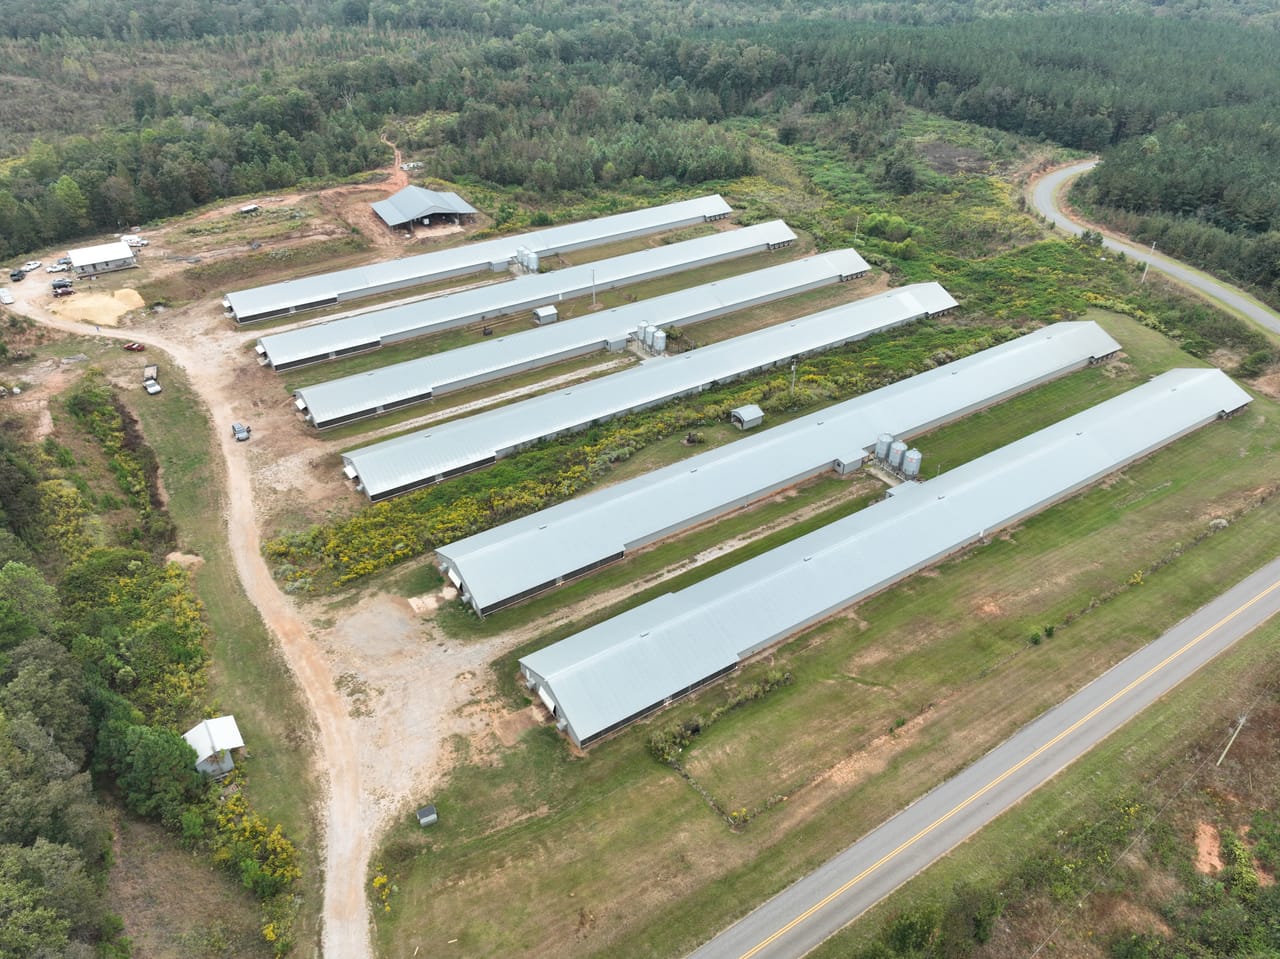 Poultry Farming Opportunity in Alexander City